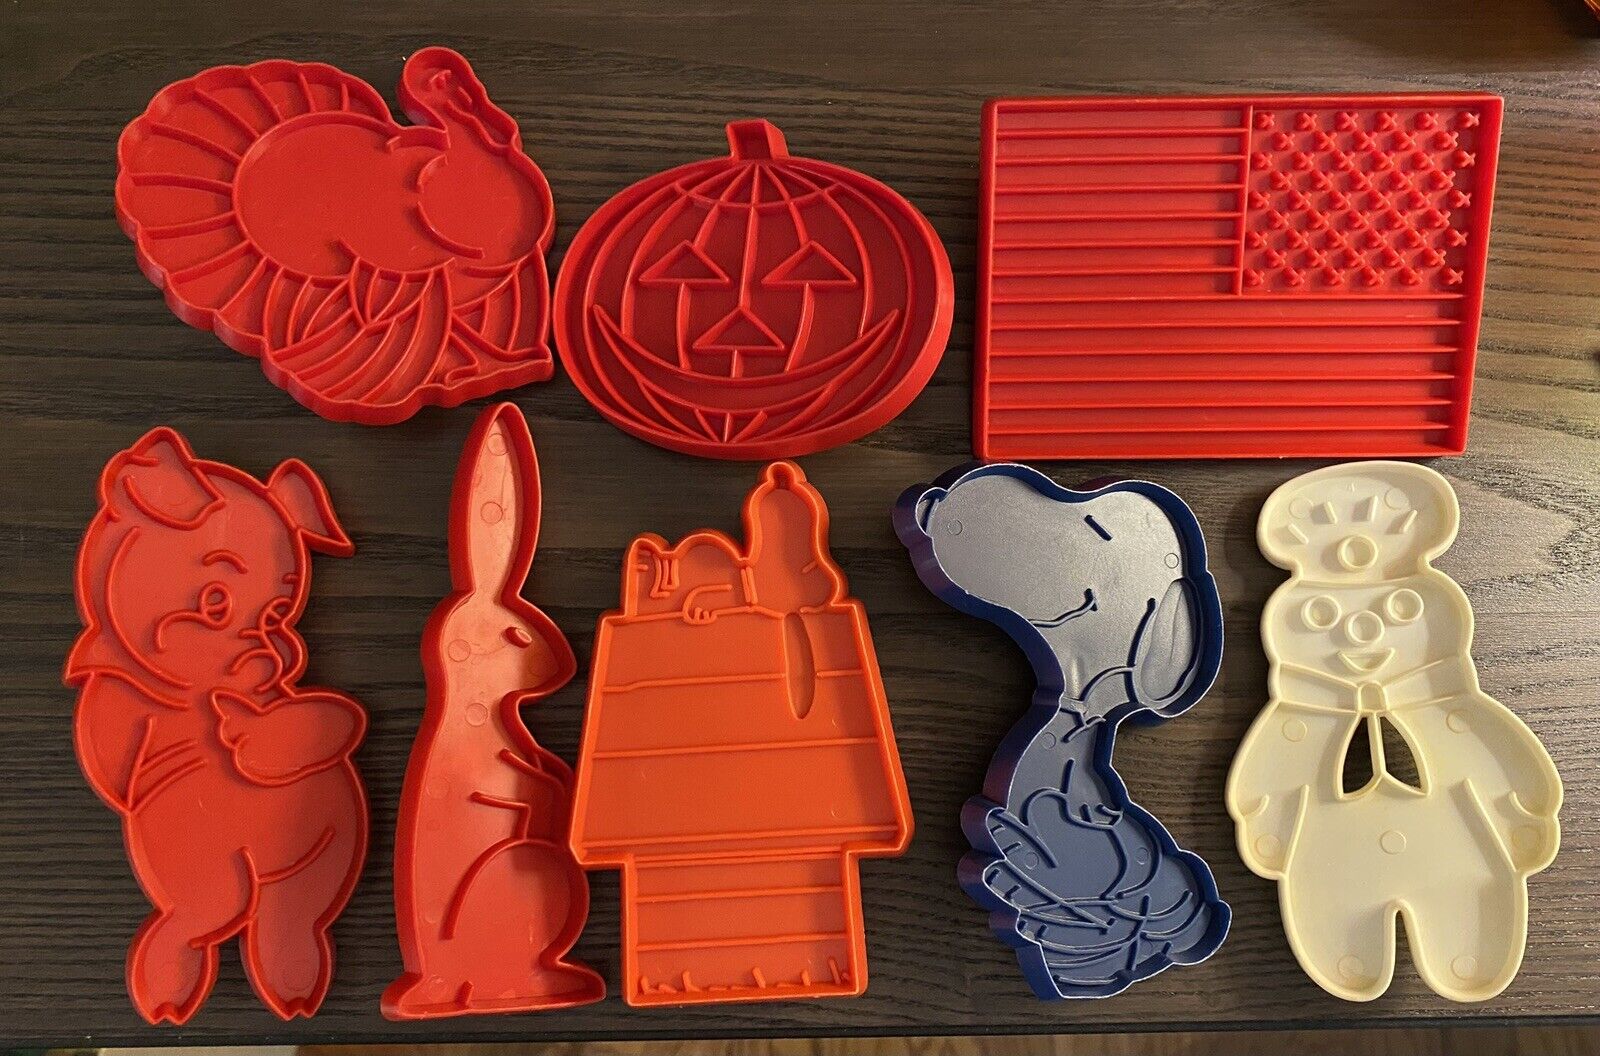 Lot of 8 Vintage Cookie Cutters 2 Snoopy, Doughboy, Pig Some Hallmark Brand